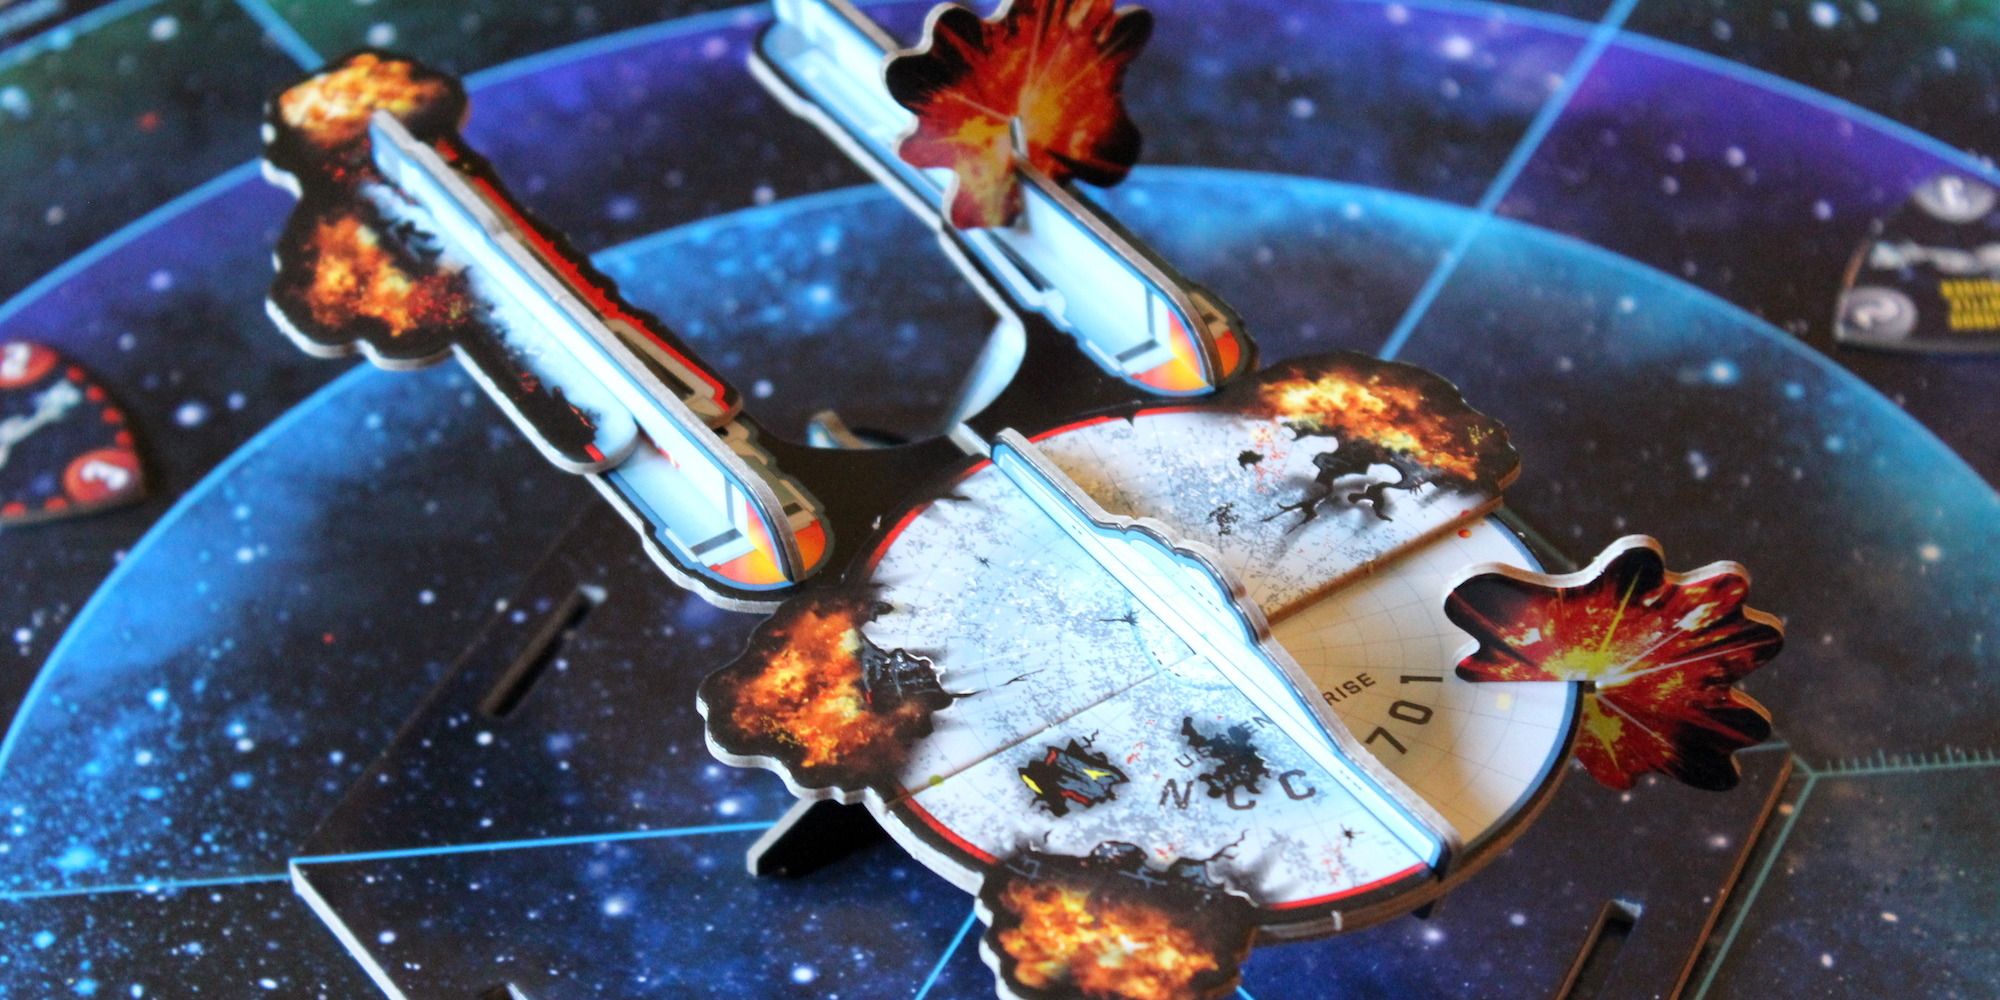 Image of an Enterprise playing piece from the Star Trek Panic! tabletop game